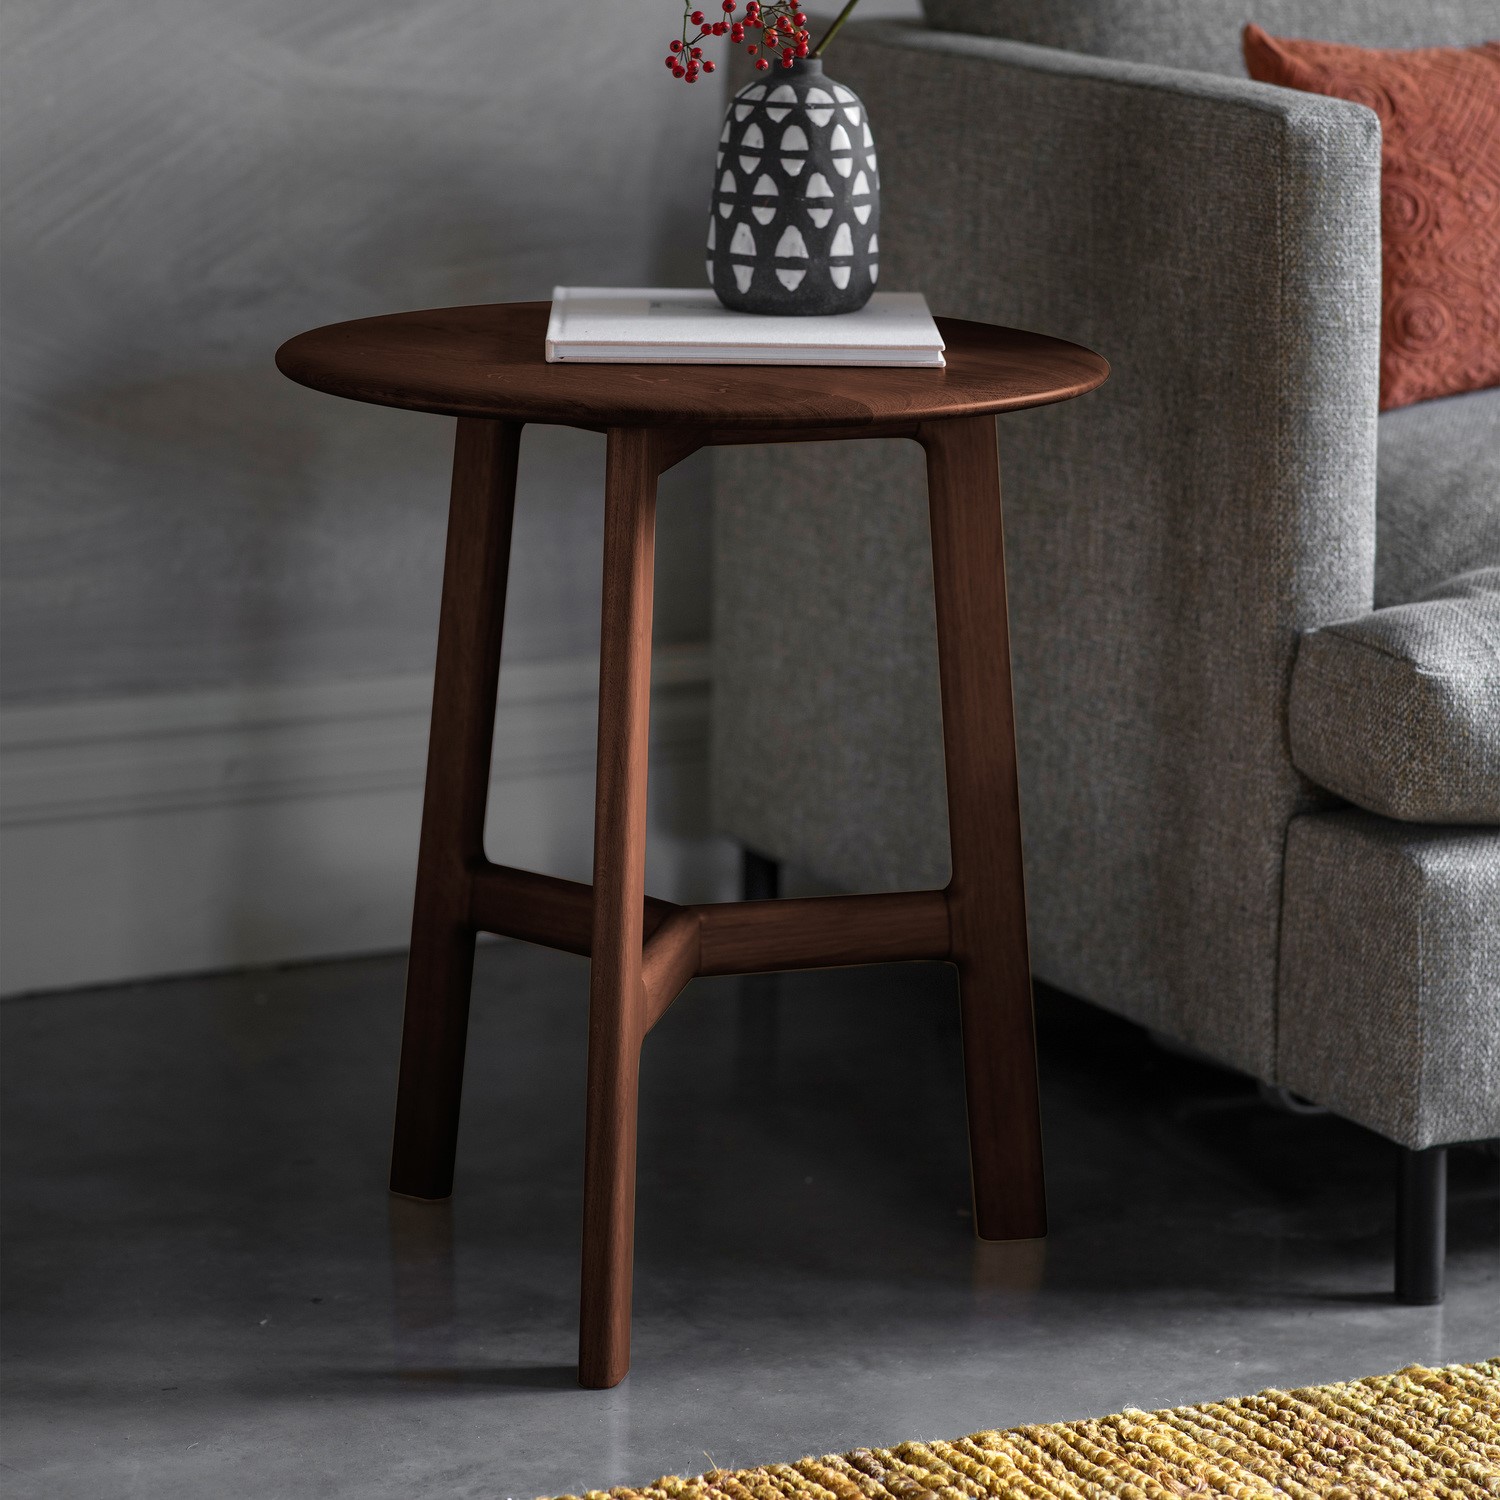 Read more about Round side table walnut madridcaspian house